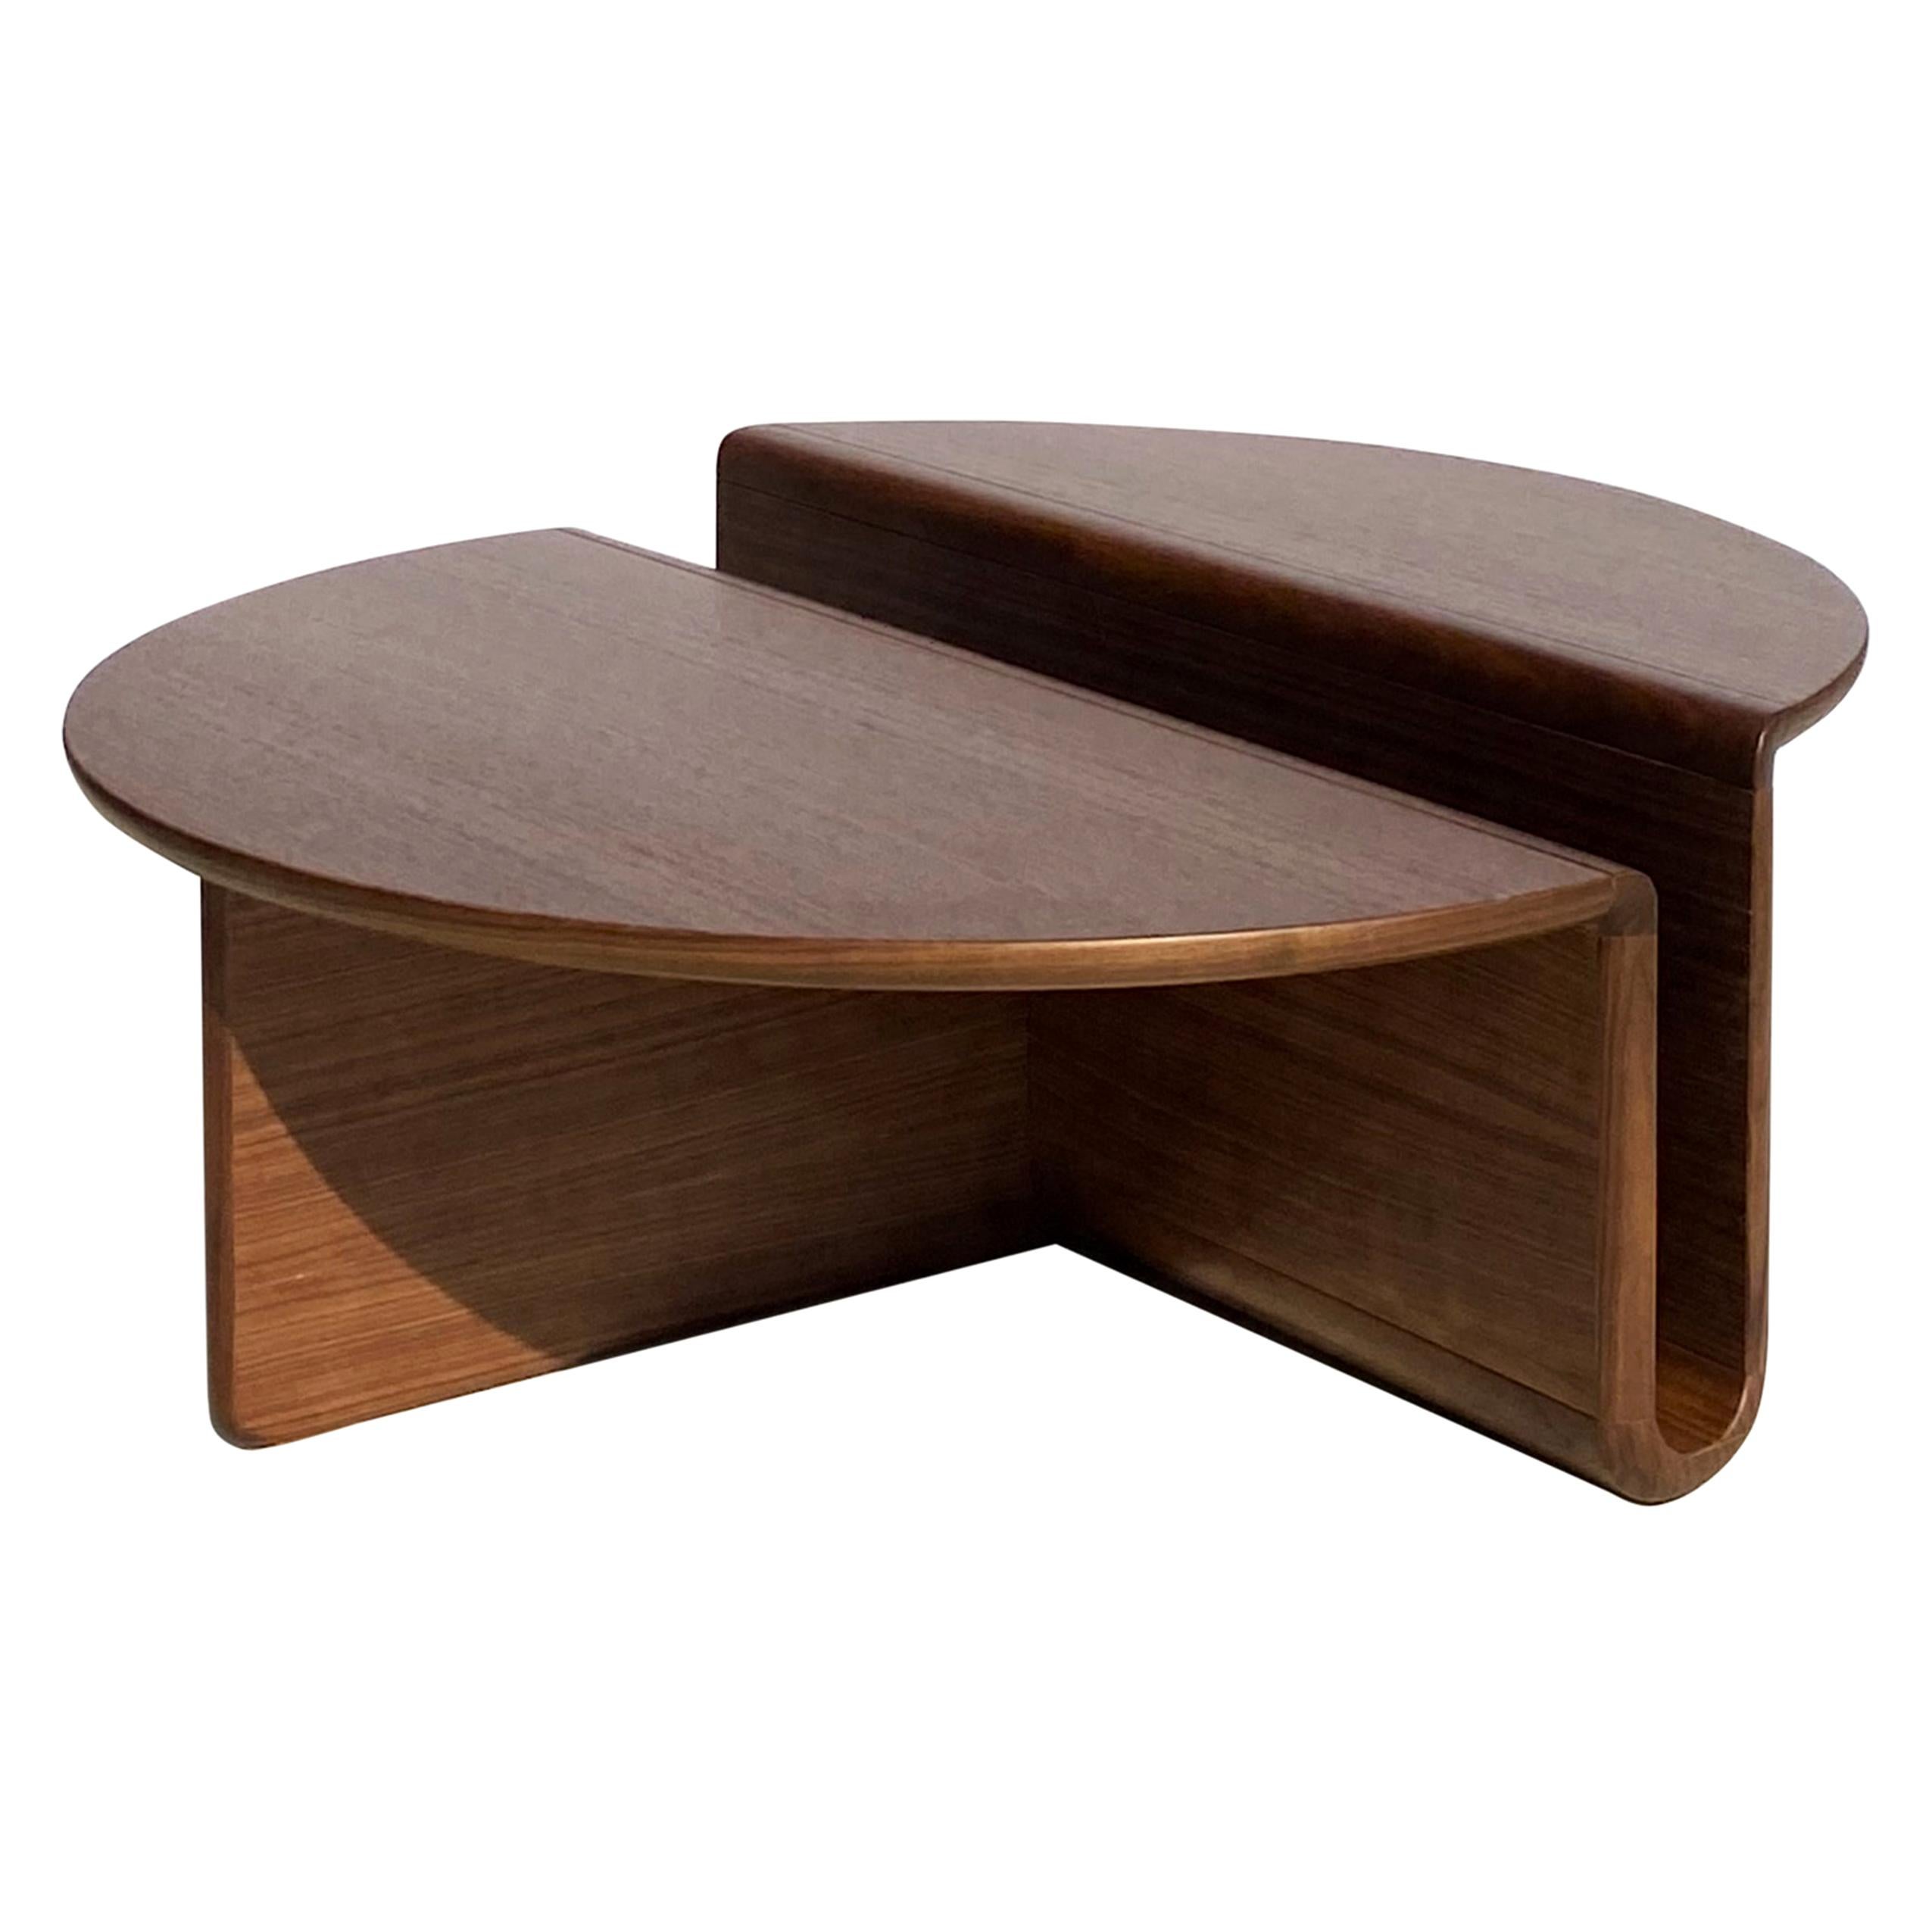 Kanyon Coffee Table, Contemporary Sculptural Minimalist Round Wooden Walnut For Sale